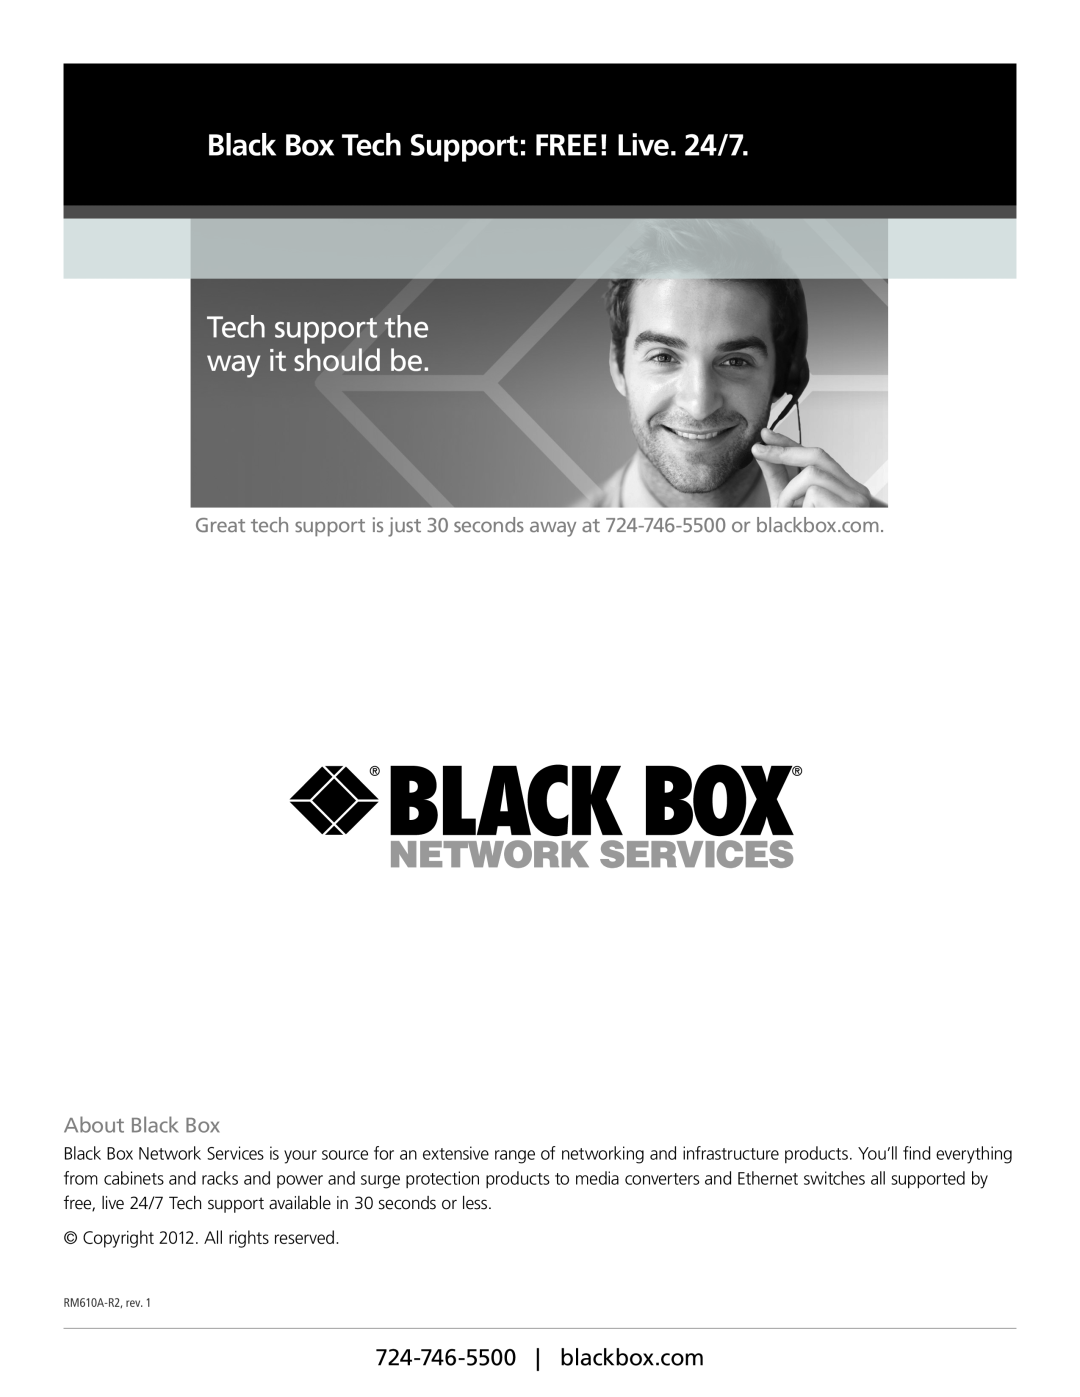 Black Box RM610A-R2 user manual Black Box Tech Support FREE! Live. 24/7, Tech support the way it should be, About Black Box 